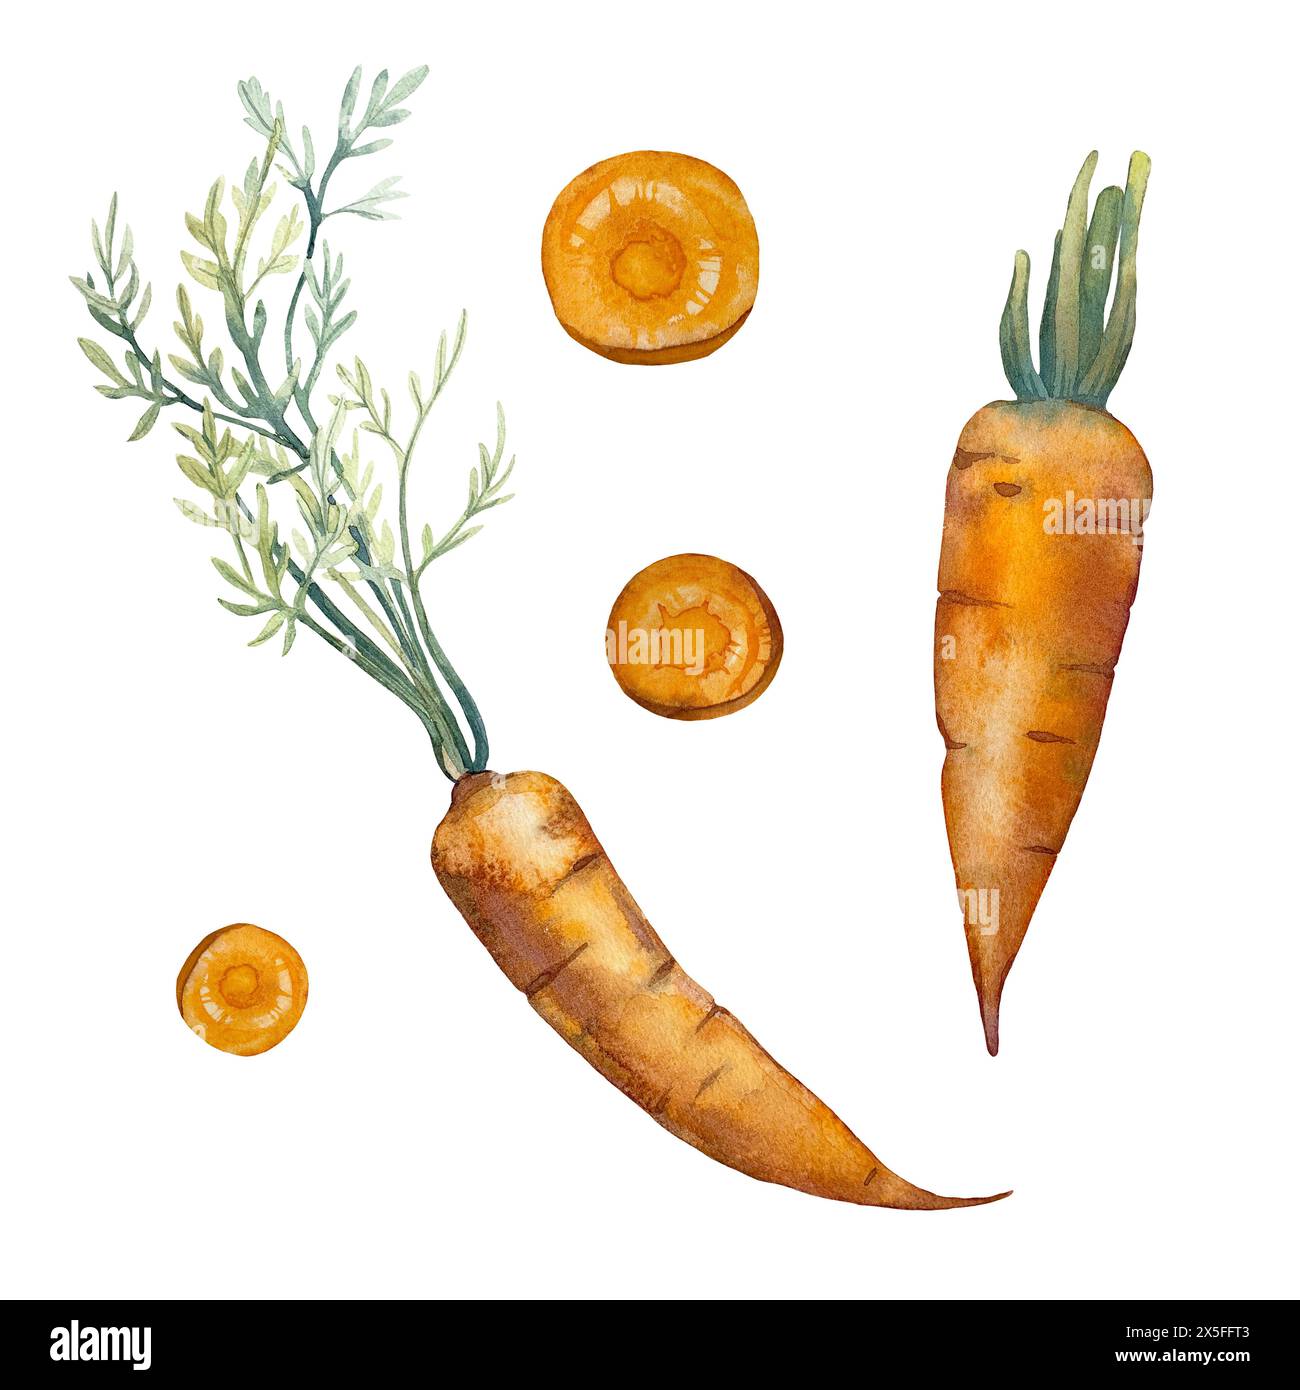 Carrot with leaves, root, pieces. Set of watercolor illustrations drawn by hand  Stock Photo